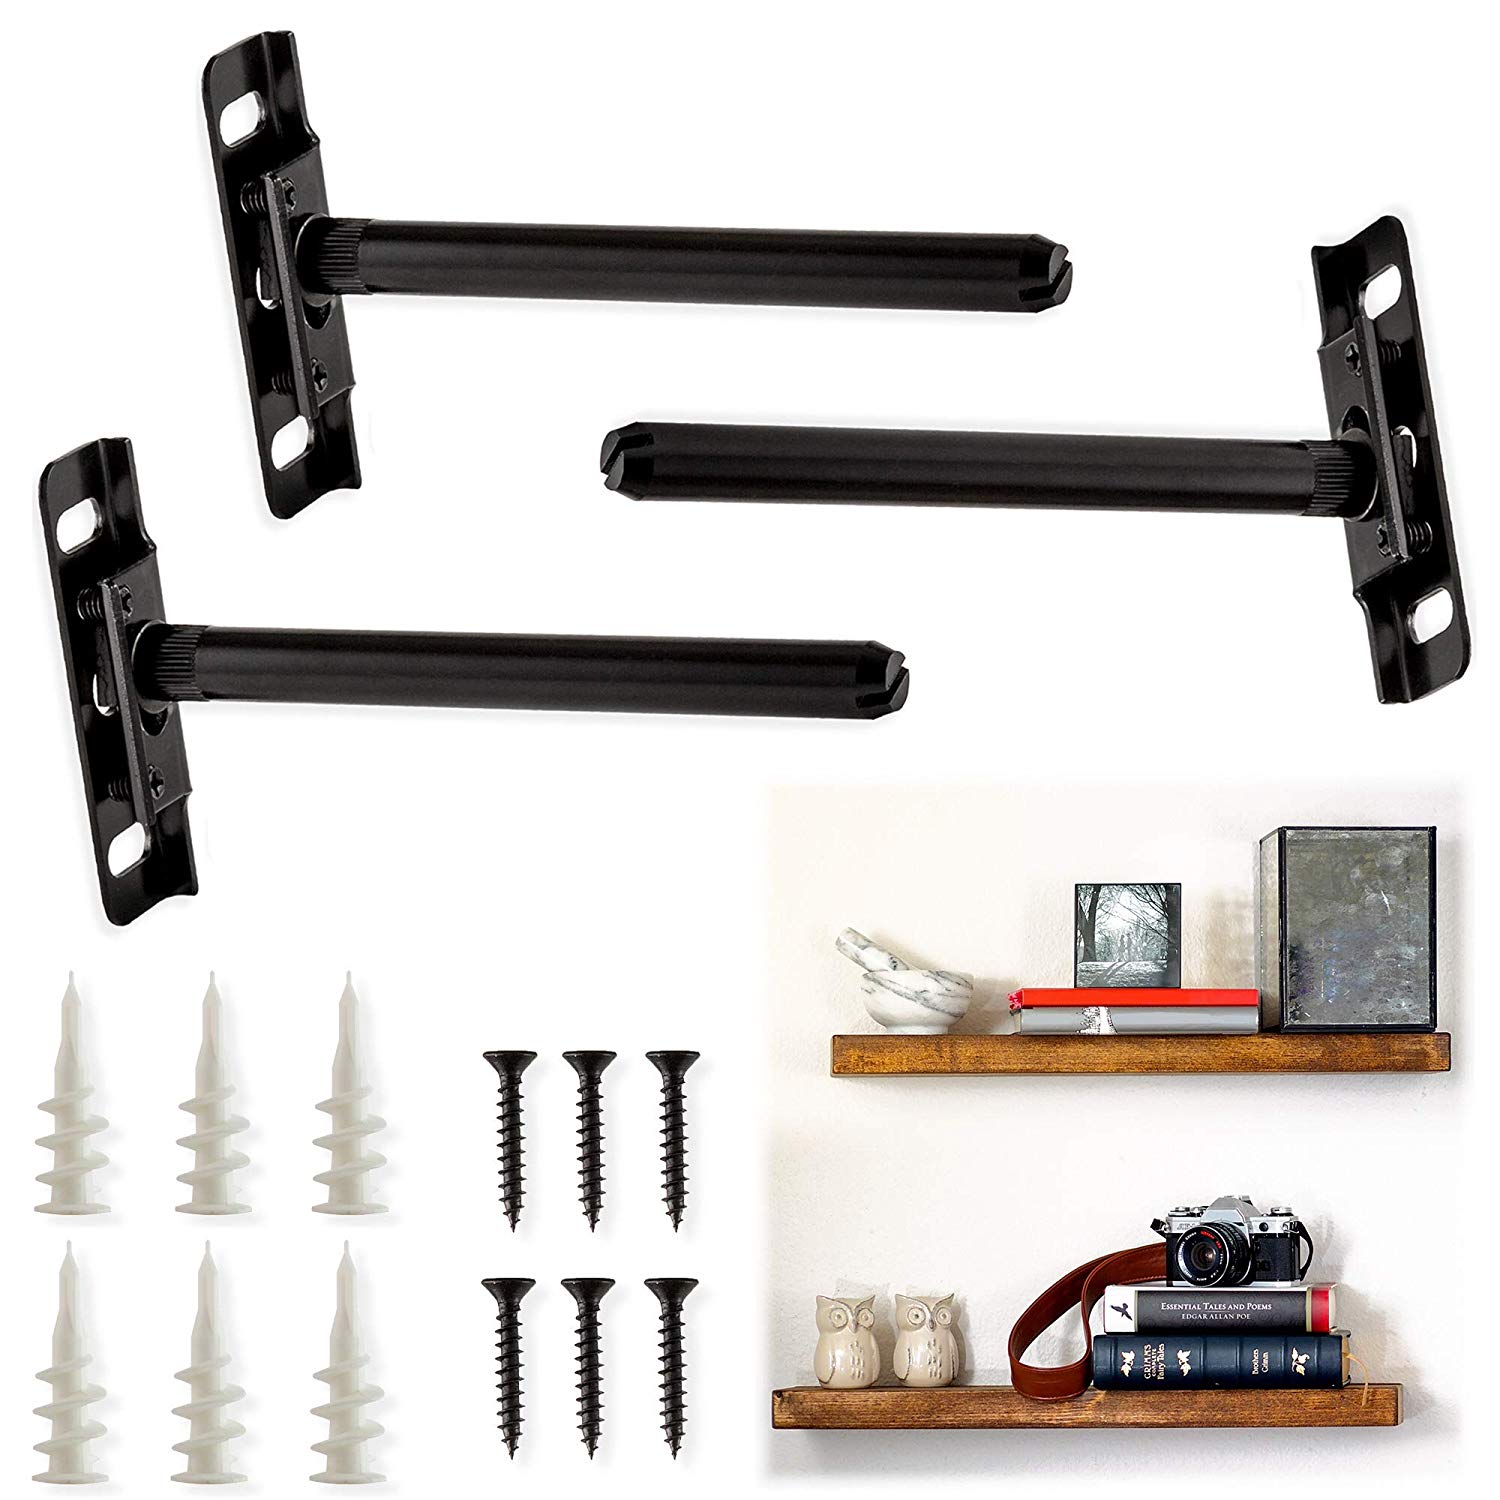 flexibolt adjustable floating shelf bracket pack concealed hidden brackets invisible heavy duty wall mount blind support for shelves with screws easy ikeas shelving unit replace